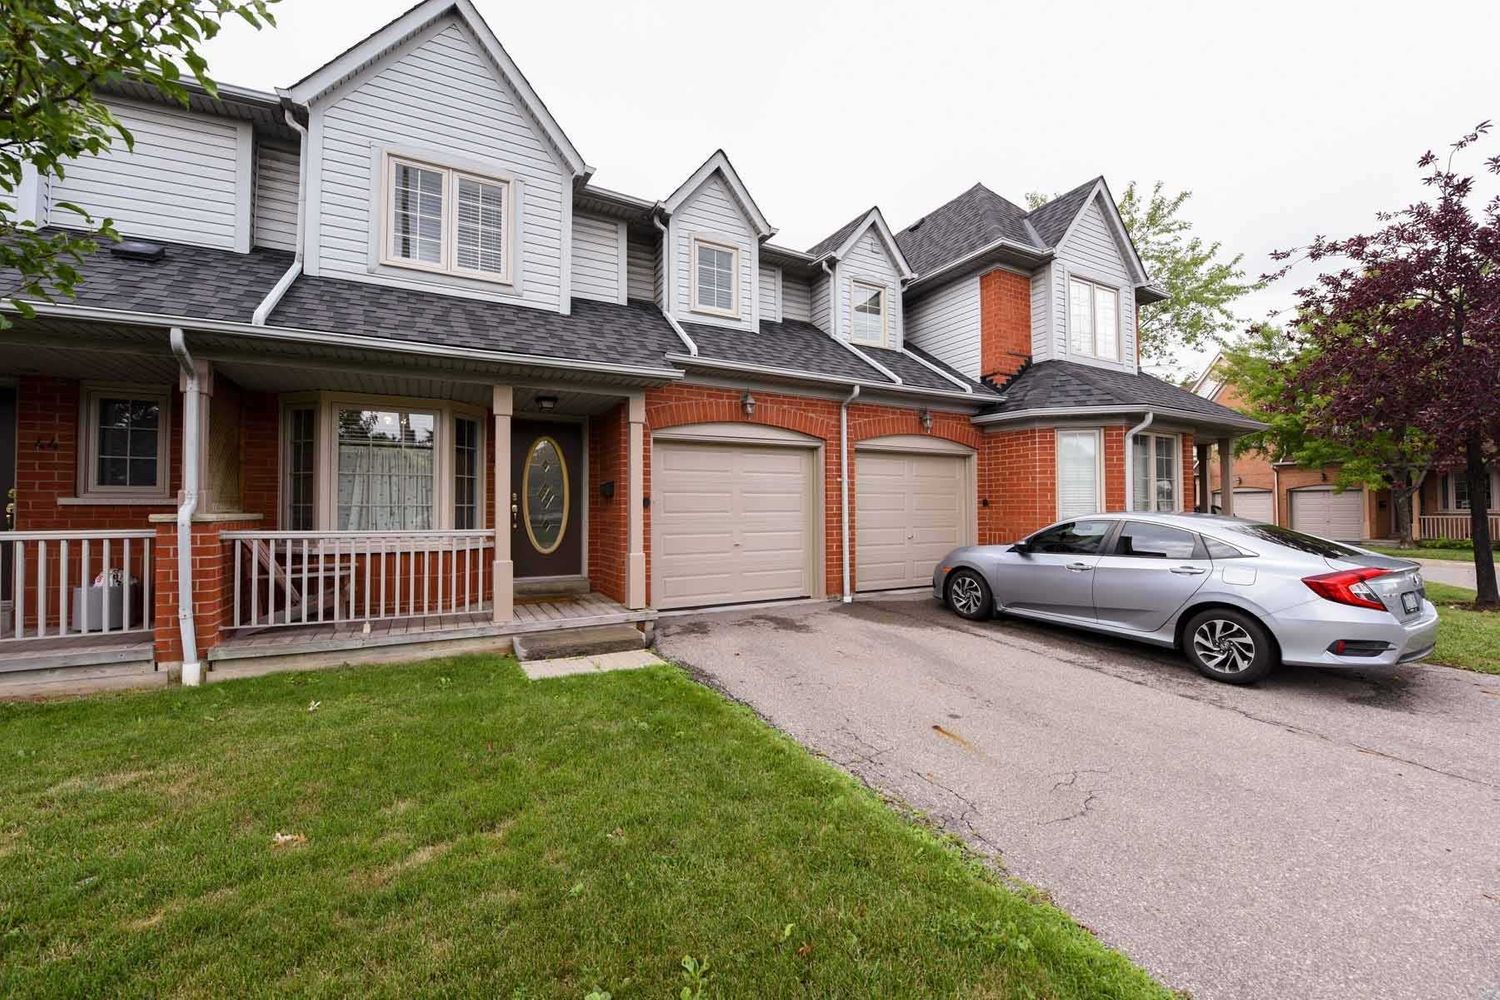 5223 Fairford Crescent. 5223 Fairford Cres Townhomes is located in  Mississauga, Toronto - image #2 of 2